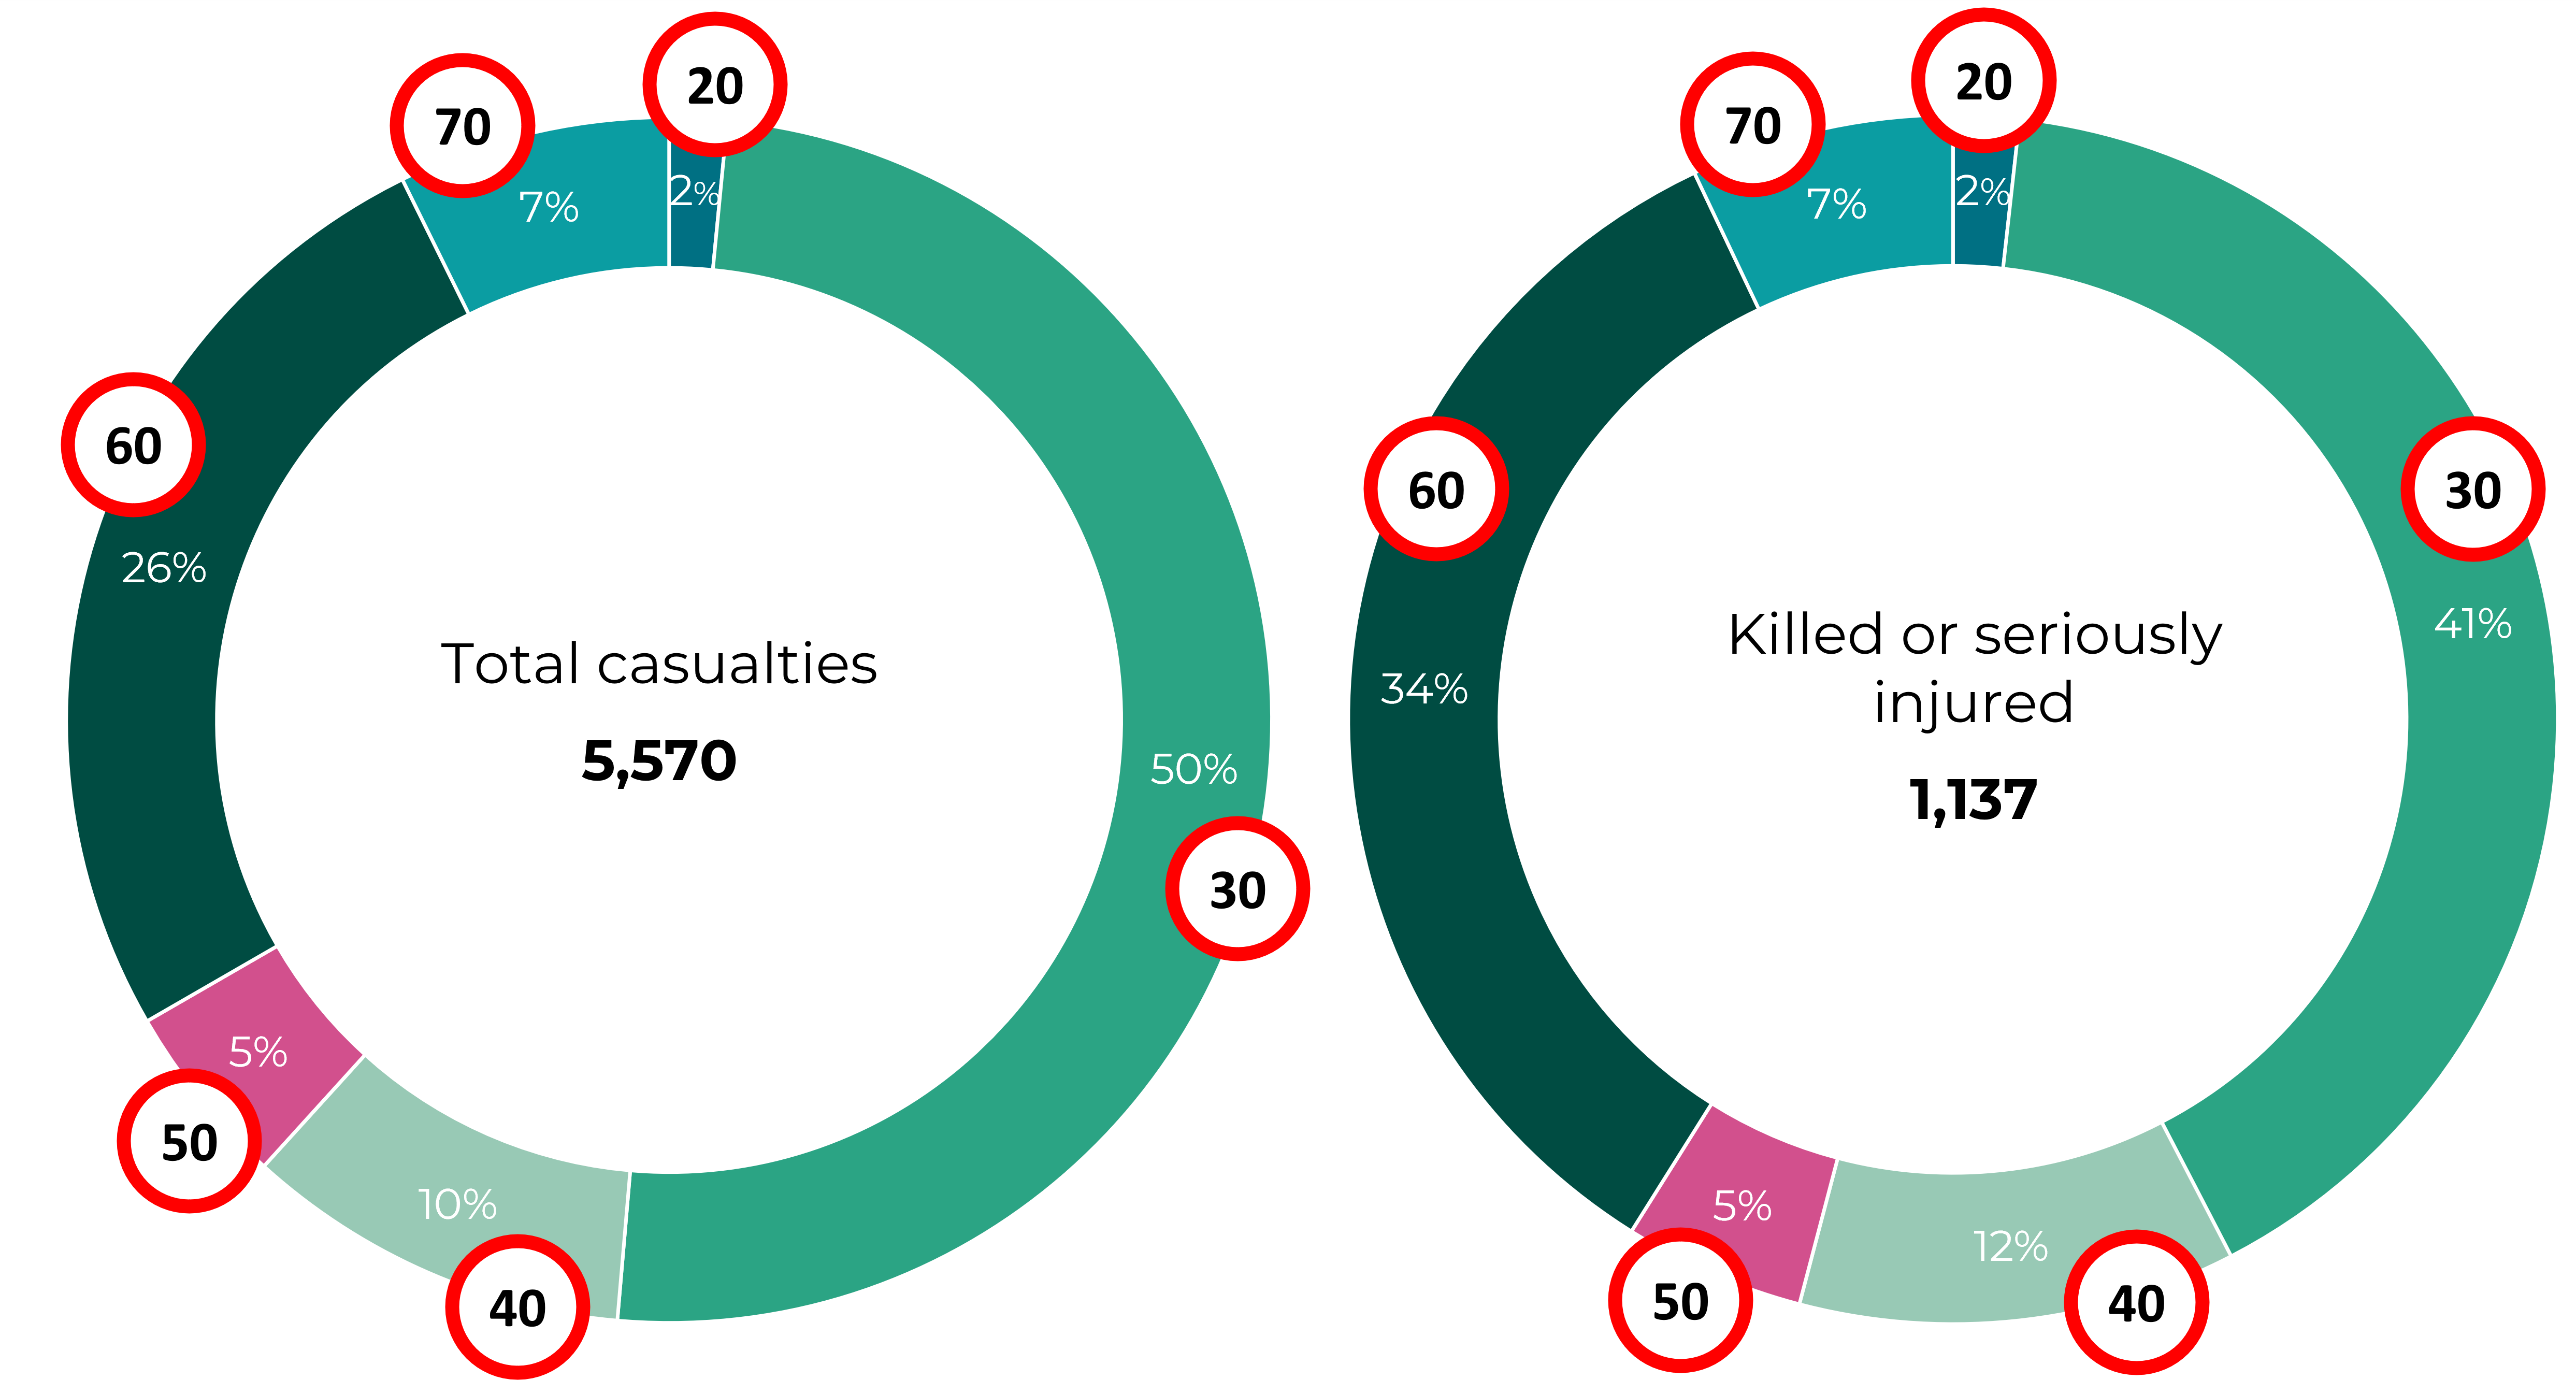 Graphs show the proportion of total casualties and people killed or seriously injured by road speed limit. It shows that accidents on 30mph roads account for the greatest proportion of total casualties (at 50%) and serious casualties and deaths (at 41%). 20mph roads only accounted for 2% of total casualties and 2% of people killed or seriously injured.